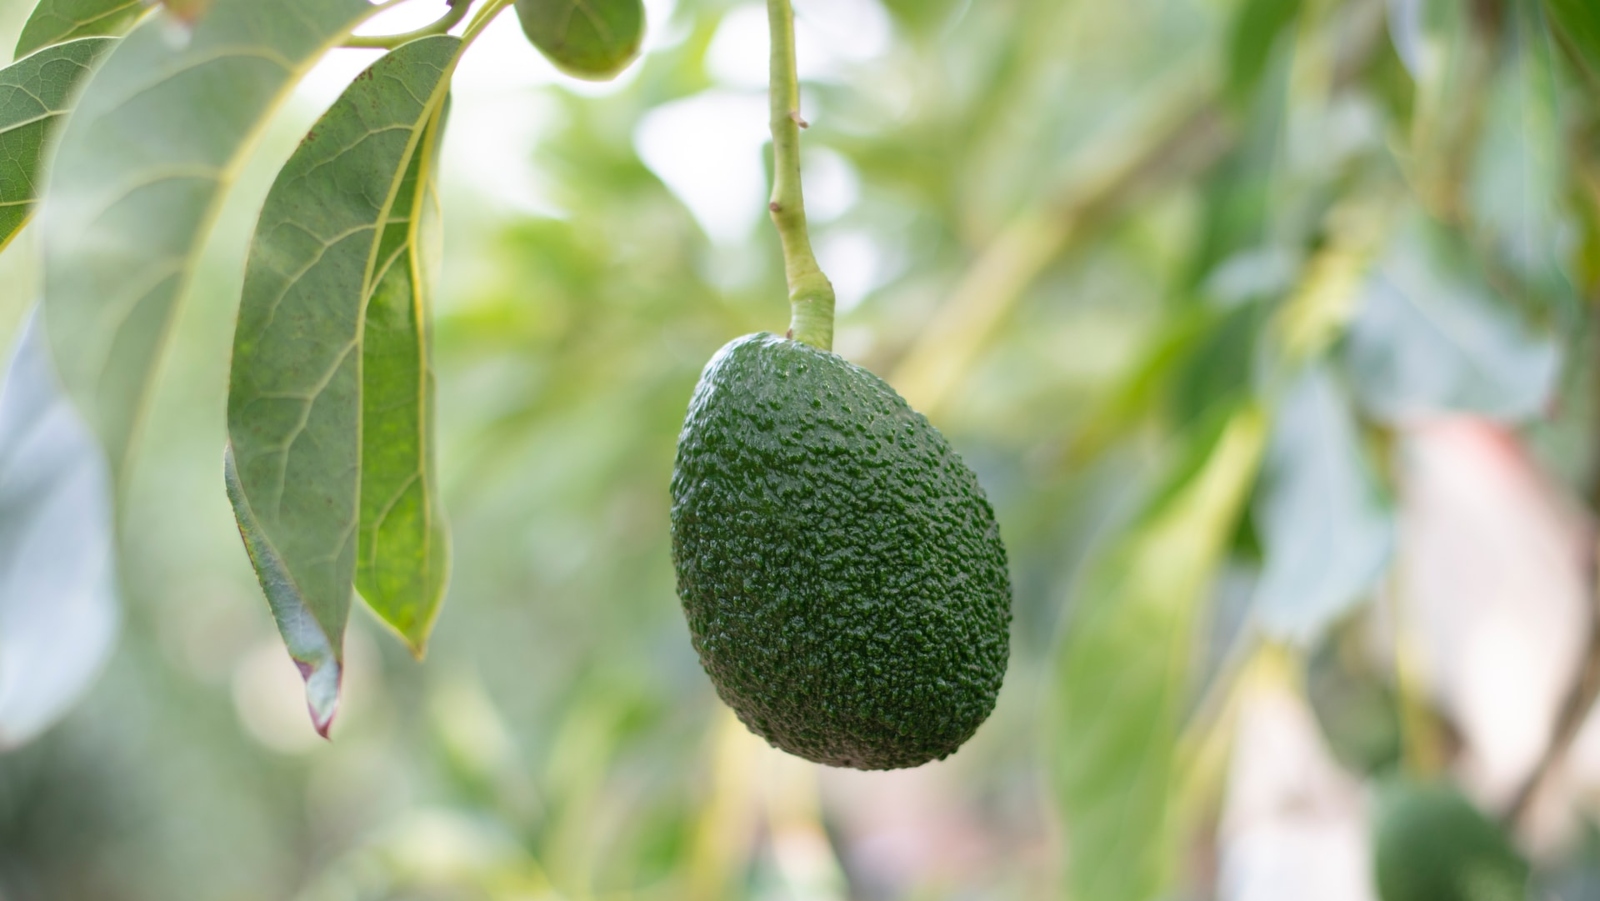 Avocados can be produced more quickly and uniformly with tissue culture. Photo by Wimber Cancho on Unsplash